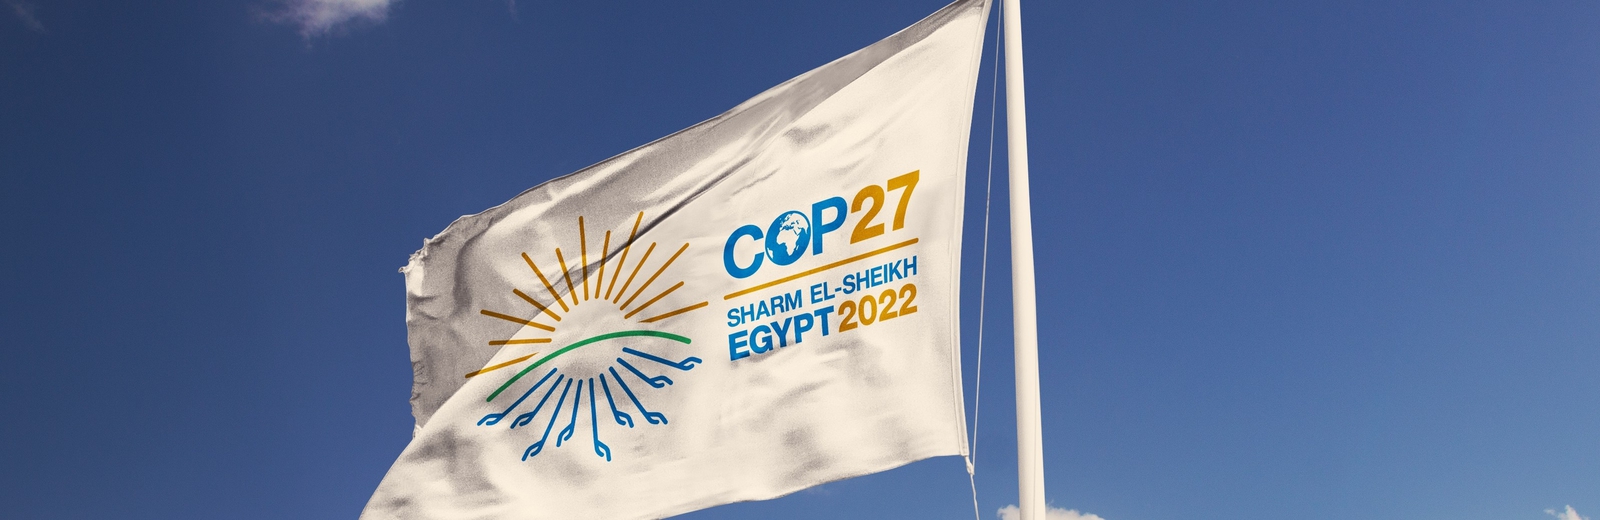 COP27 flag waves in the wind